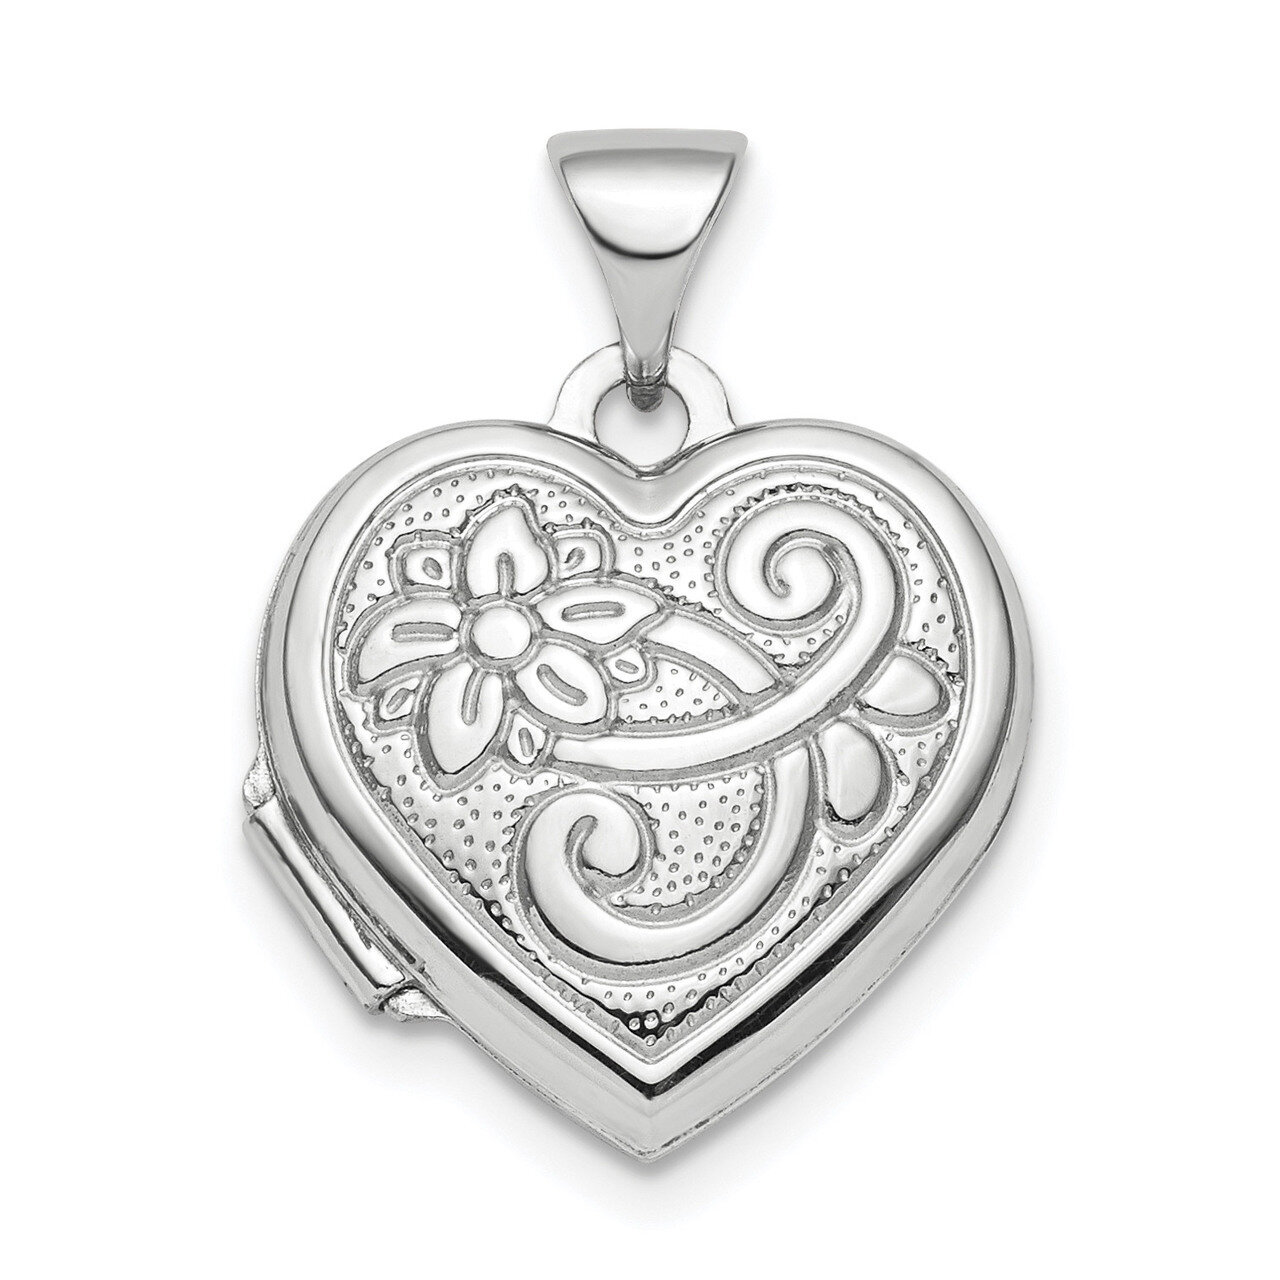 15mm Patterned Heart Locket Pendant Sterling Silver Rhodium-plated QLS811